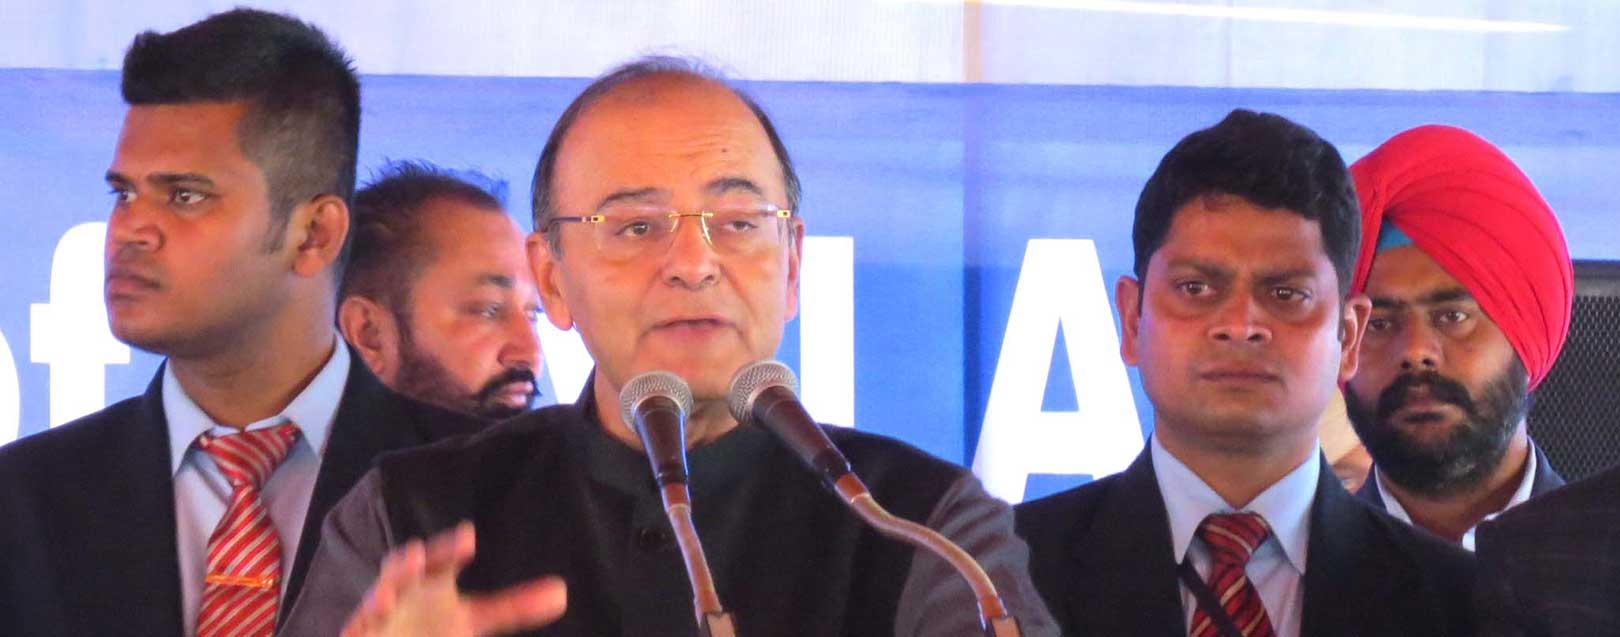 Traders using digital mode of payment will get a significant tax benefit: FM